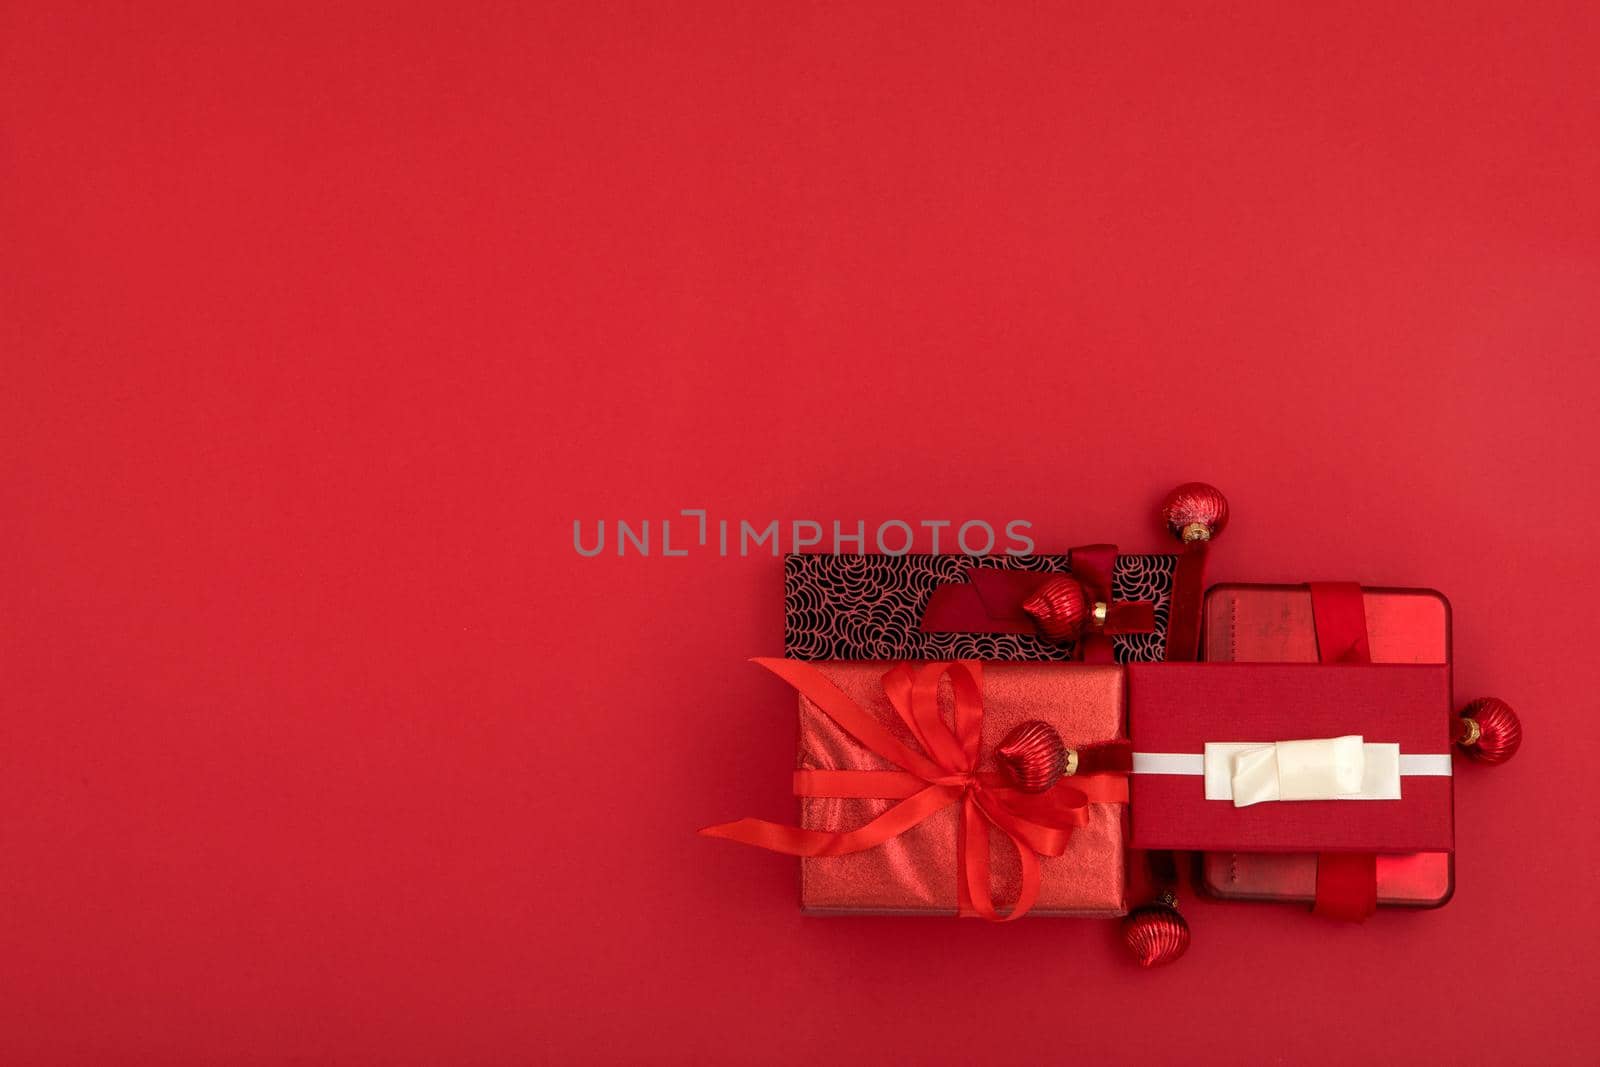 Top view composition of various Christmas presents wrapped in paper with ribbons and decorative balls placed on bright red surface with empty space